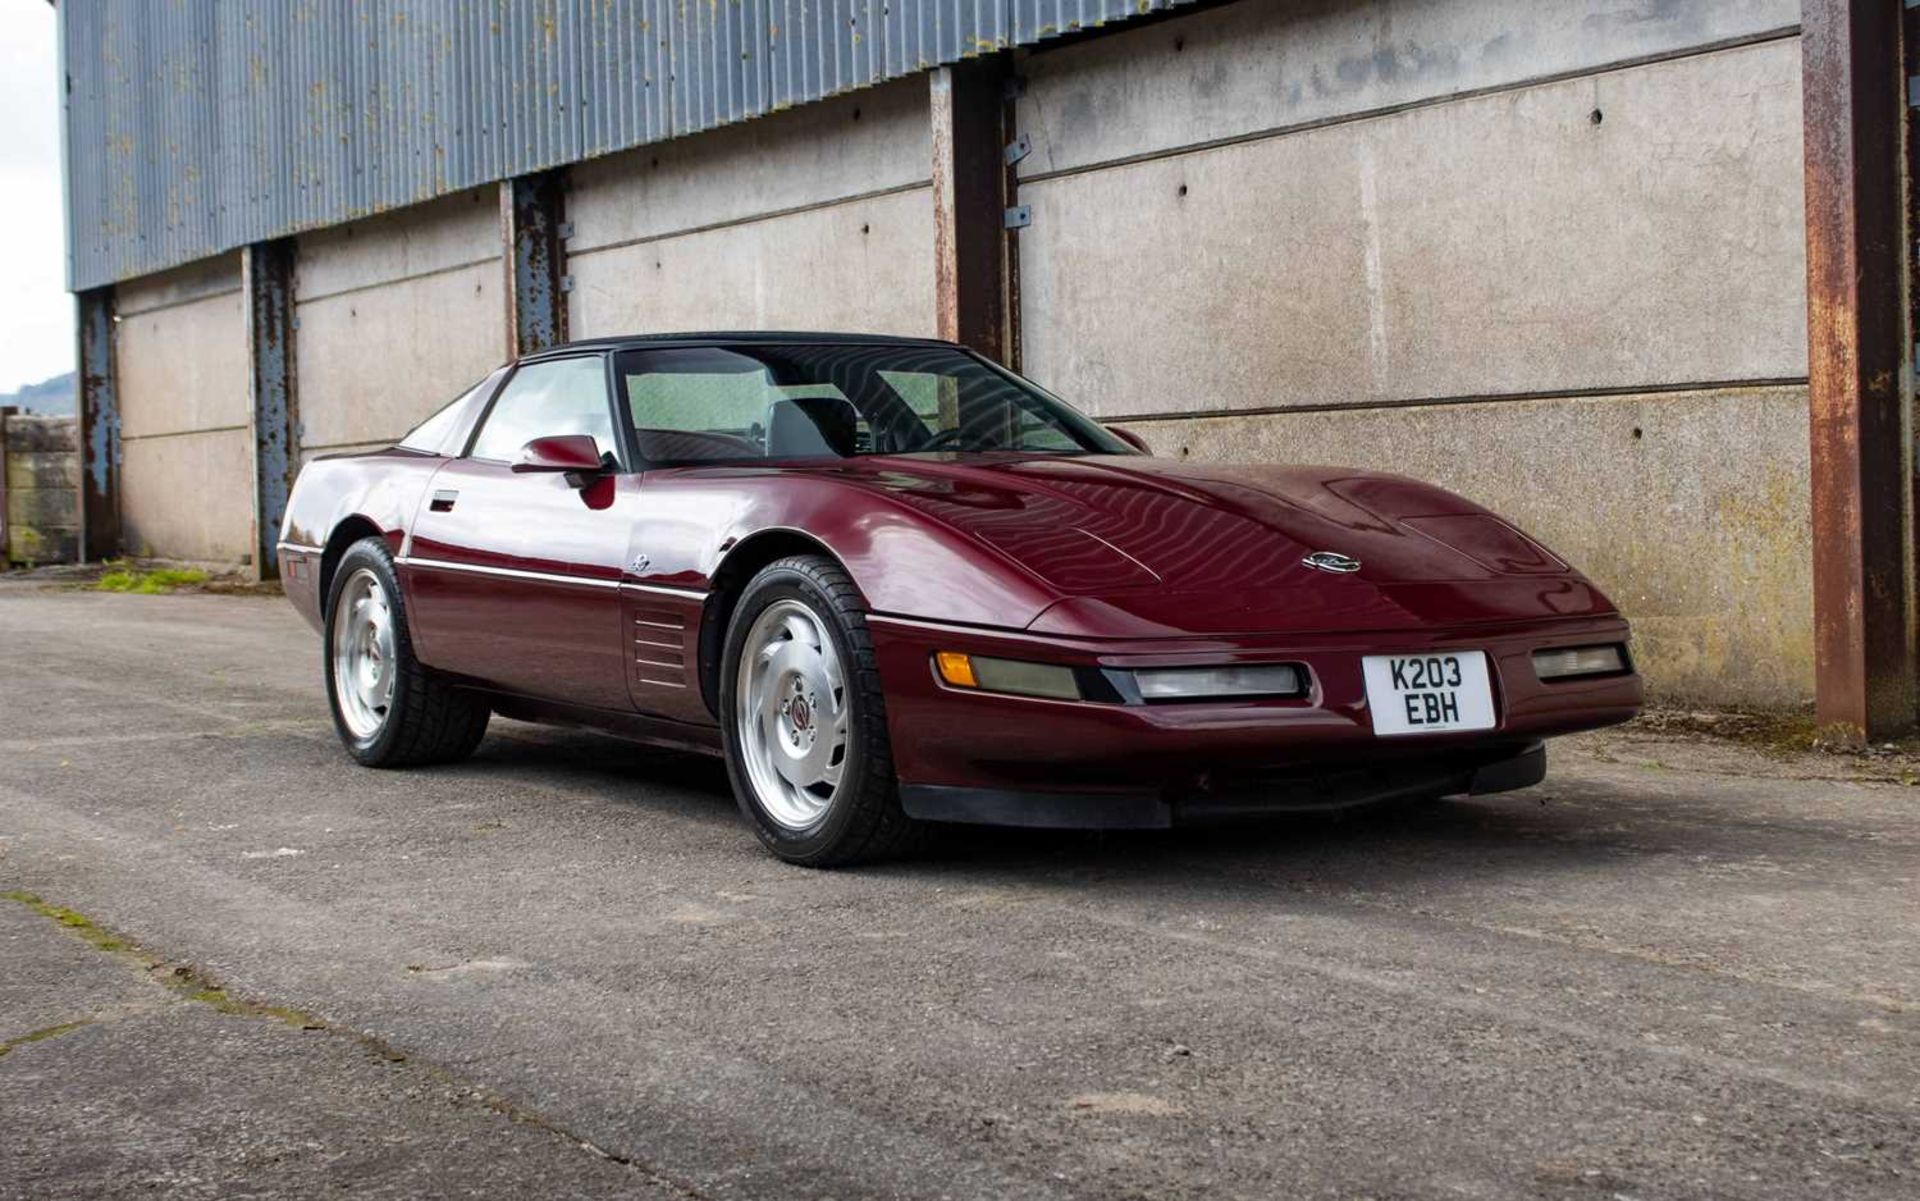 1993 Chevrolet Corvette C4  The highly sought-after 40th Anniversary Edition 